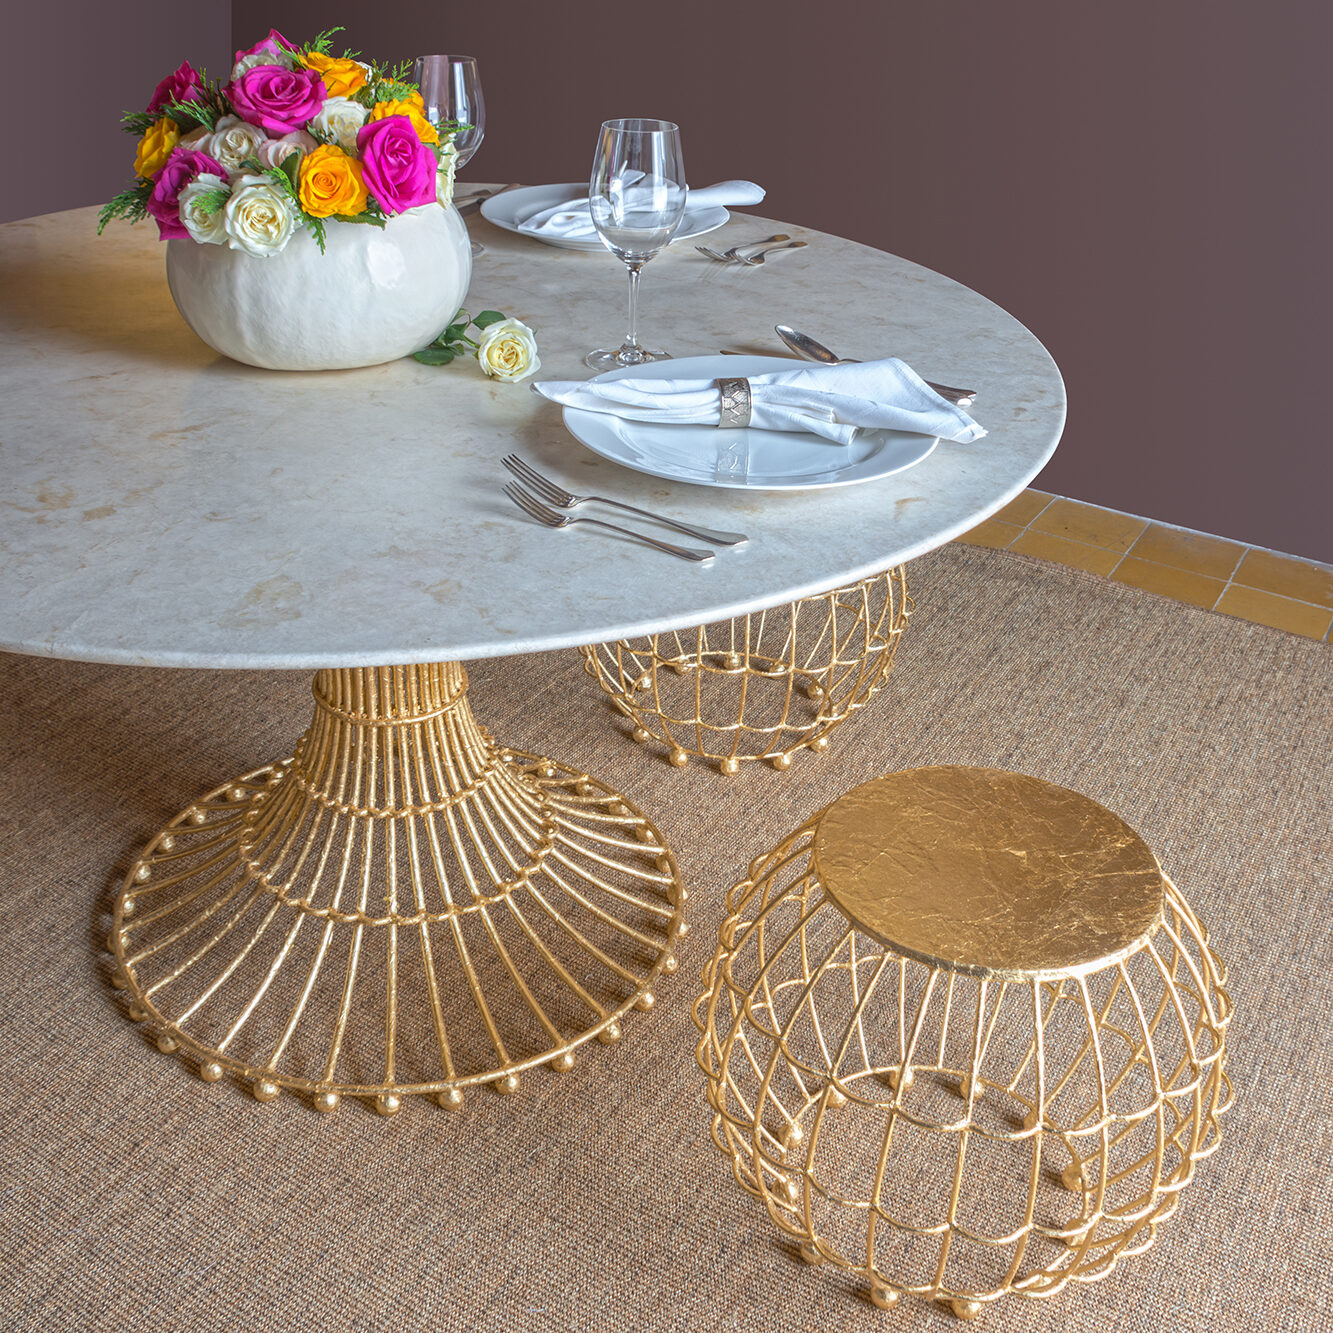 Gilded Cage Large Occasional Table in Midas Gold